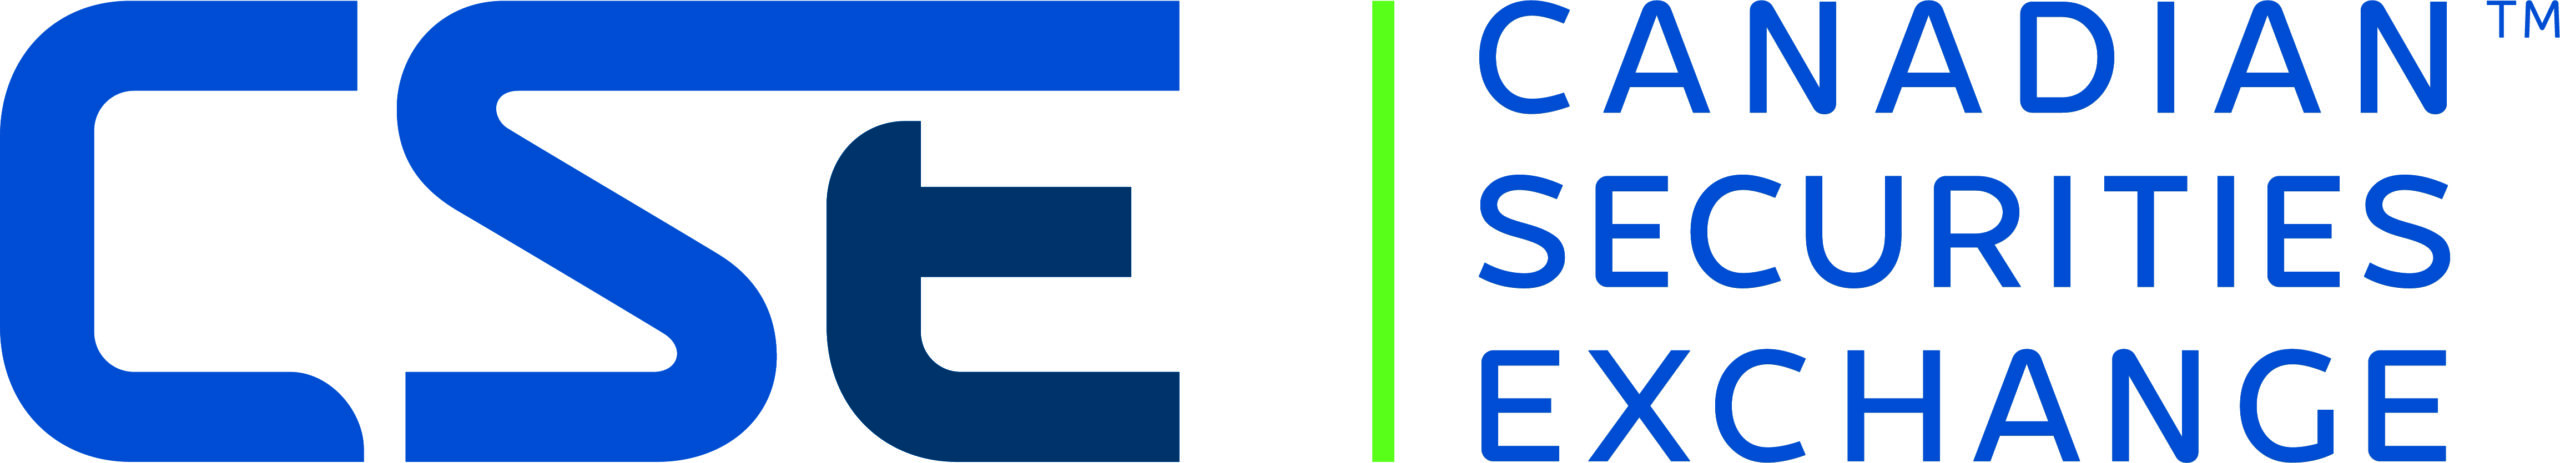 Official Blog of the CSE - Canadian Securities Exchange